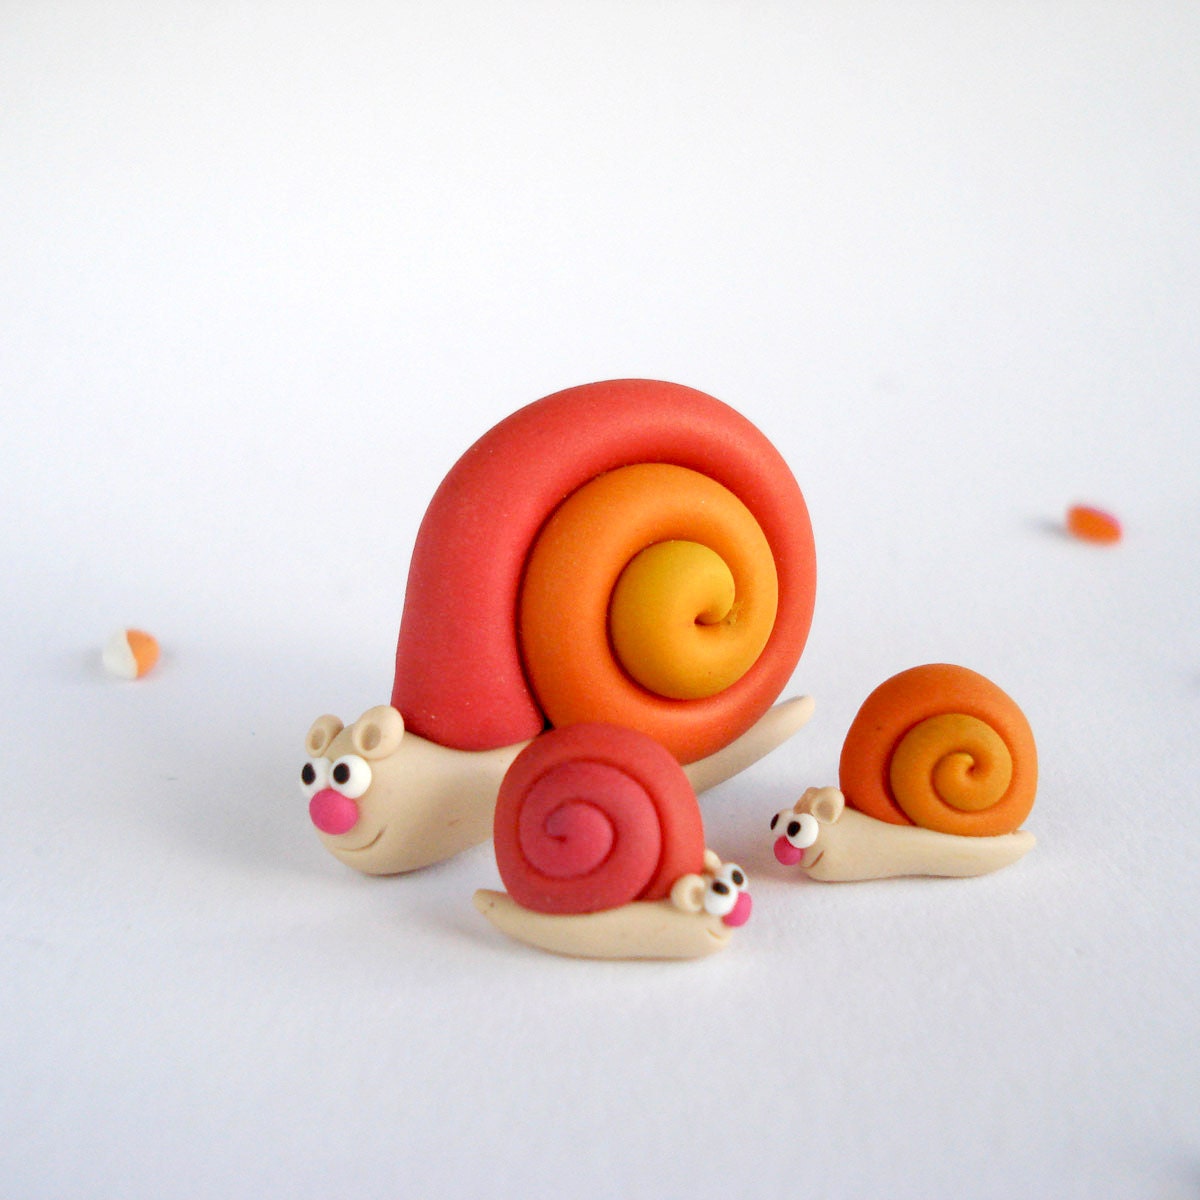 Tropical Snail Brooch and Earrings Set, Summer jewelry hand sculpted in polymer clay - Thelittlecreatures